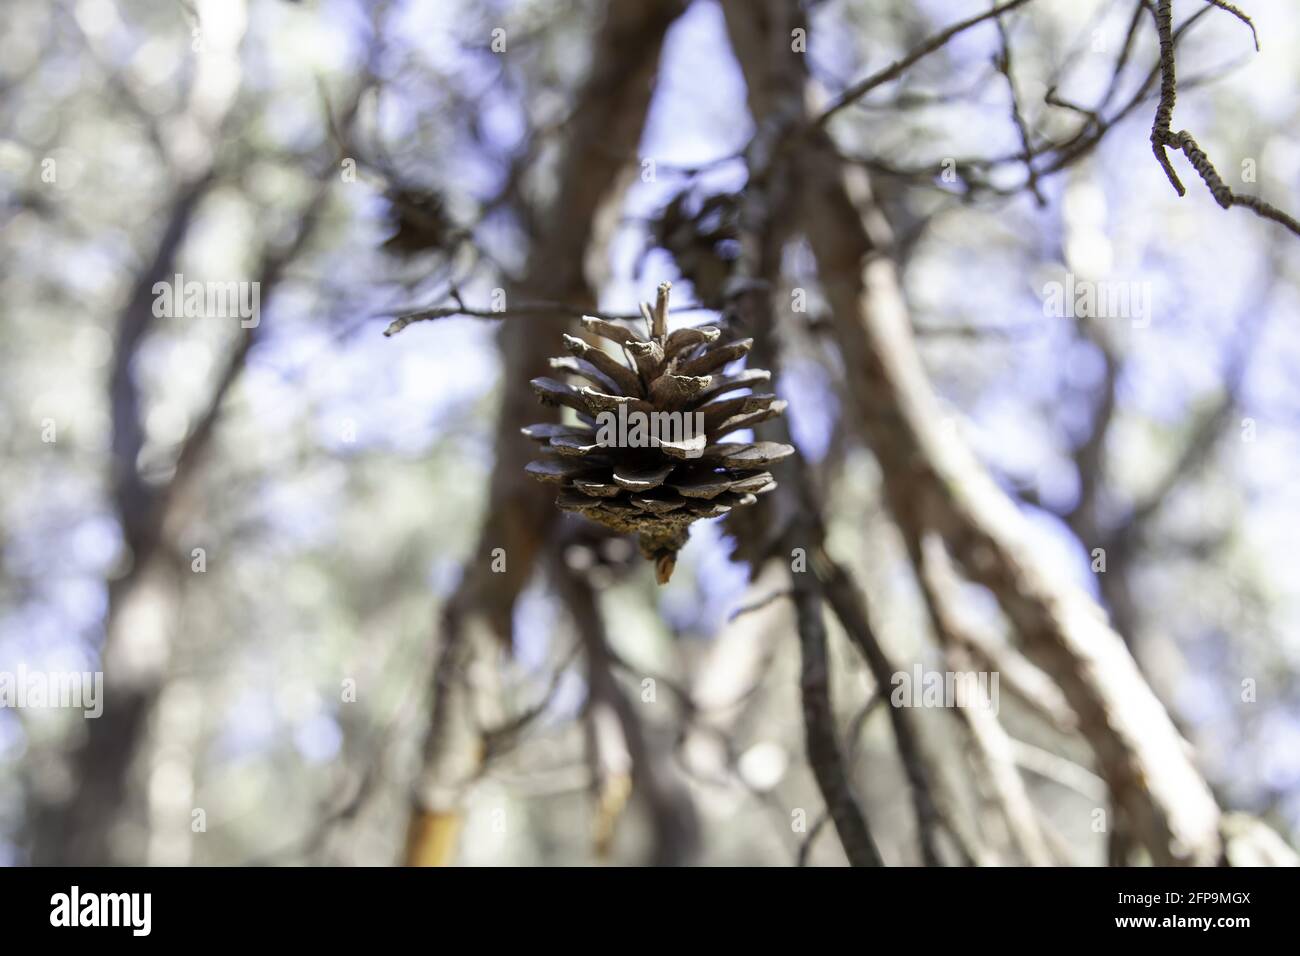 Detail of pine fruit, nature and outdoors, caring for the environment Stock Photo